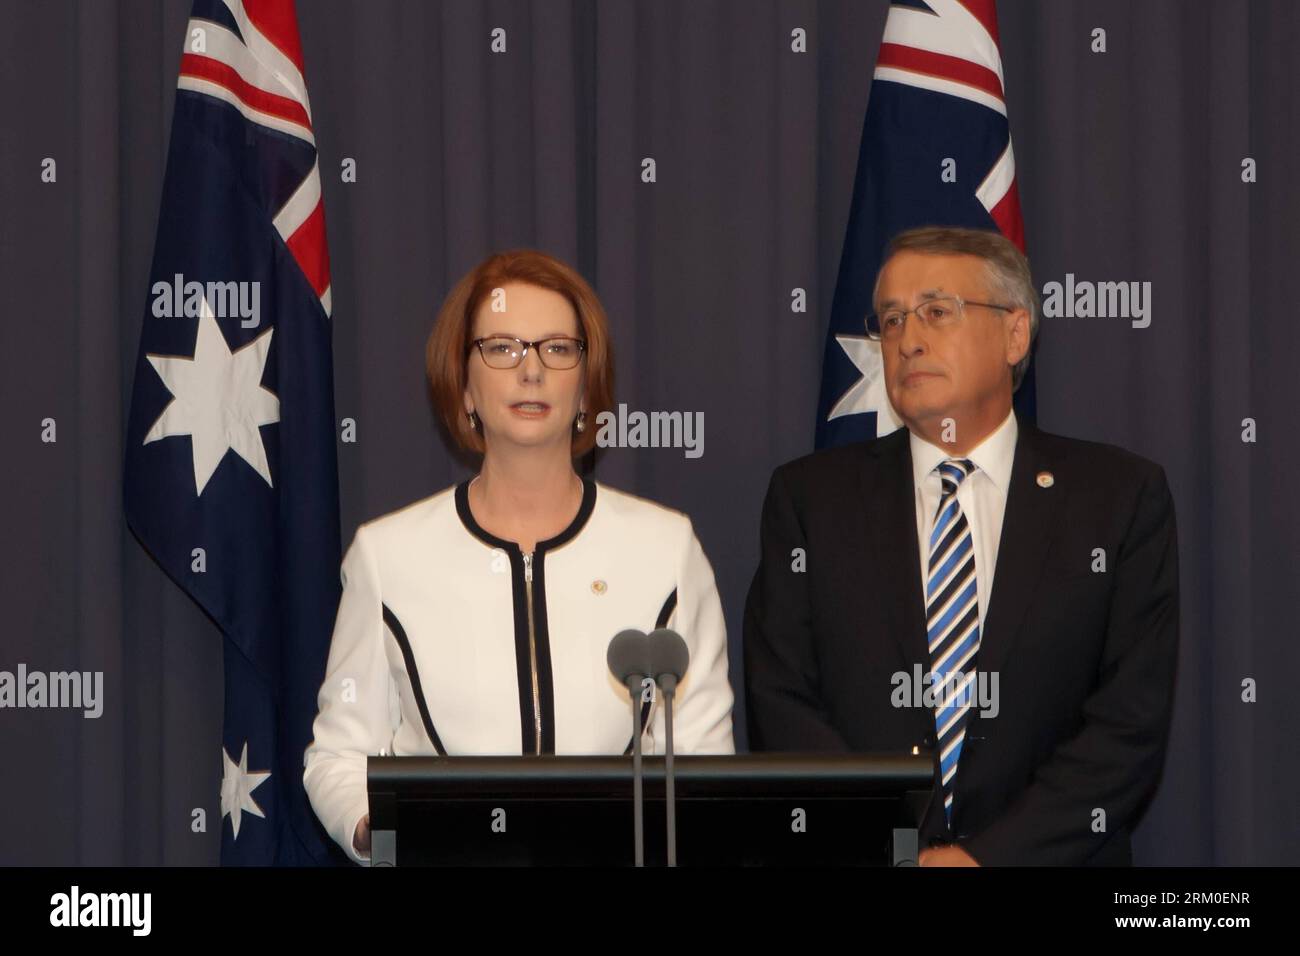 Bildnummer: 59399256  Datum: 21.03.2013  Copyright: imago/Xinhua (130321) -- CANBERRA, March 21, 2013 (Xinhua) -- Australian Prime Minister Julia Gillard and Deputy Prime Minister Wayne Swan attend a press conference in Canberra, Australia, on March 21, 2013. Julia Gillard retained her leadership of the Australian Labor Party (ALP) as well as the prime ministership on Thursday after former leader and prime minister Kevin Rudd chose not to challenge her. (Xinhua/Xu Haijing) (zjl) AUSTRALIA-CANBERRA-PM PUBLICATIONxNOTxINxCHN POlitik People PK x0x xub 2013 quer premiumd      59399256 Date 21 03 2 Stock Photo